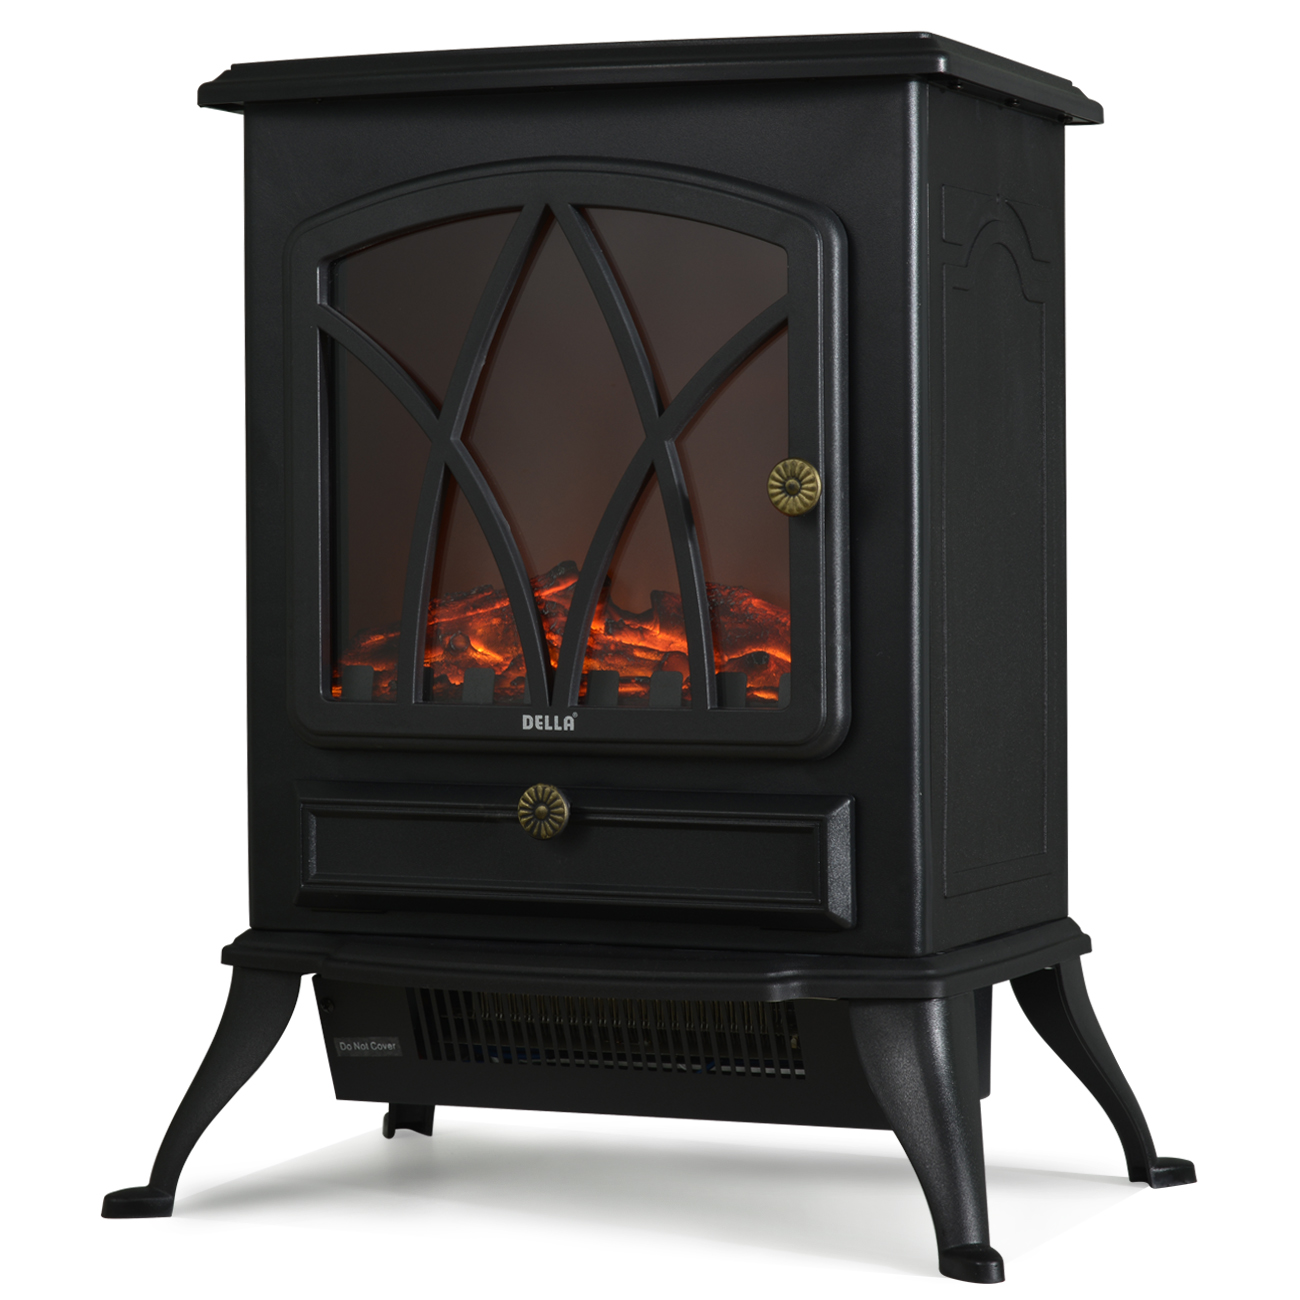 Soapstone Fireplace Awesome Stove Glass Wood Stove Glass is Black